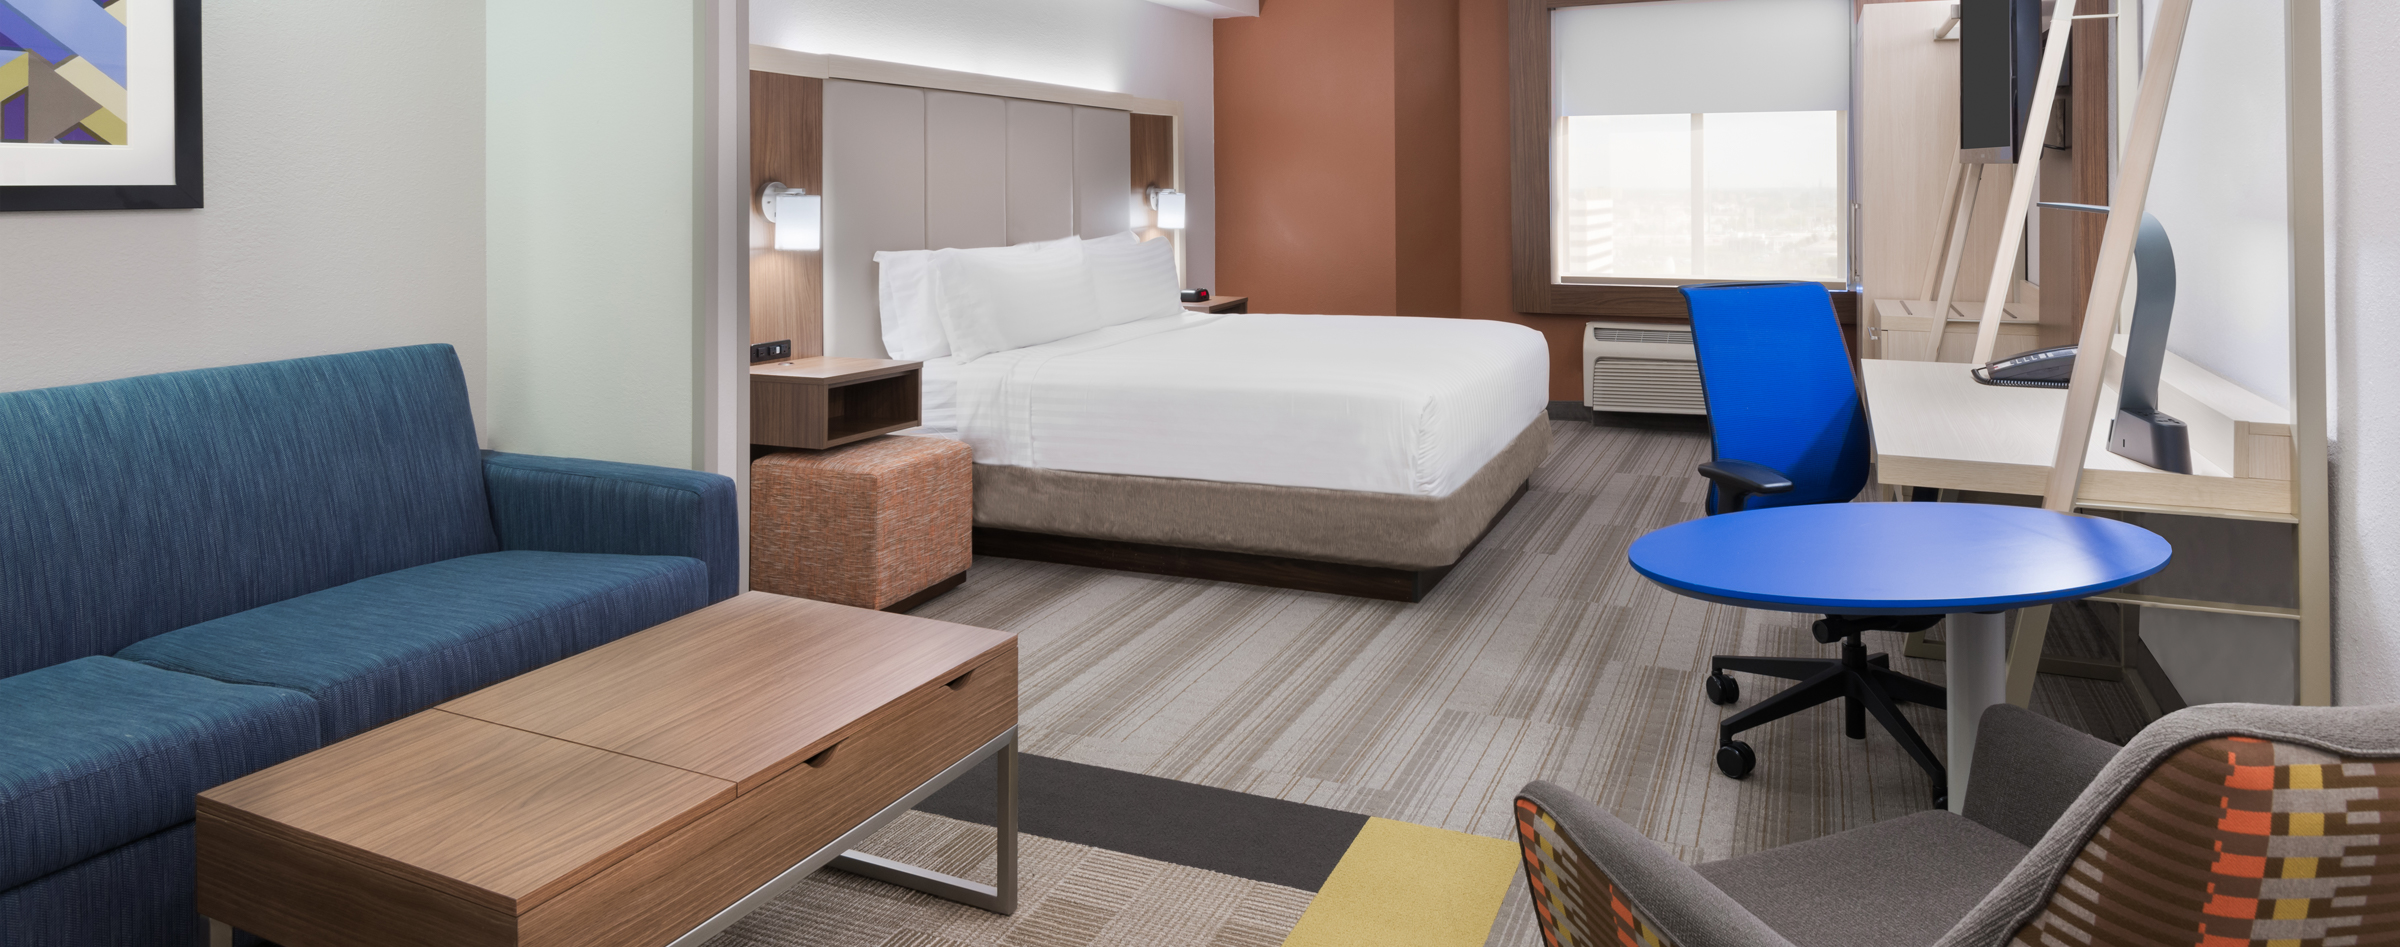 King bed and sofa bed suite at Holiday Inn Express & Suites Nearest Universal Orlando